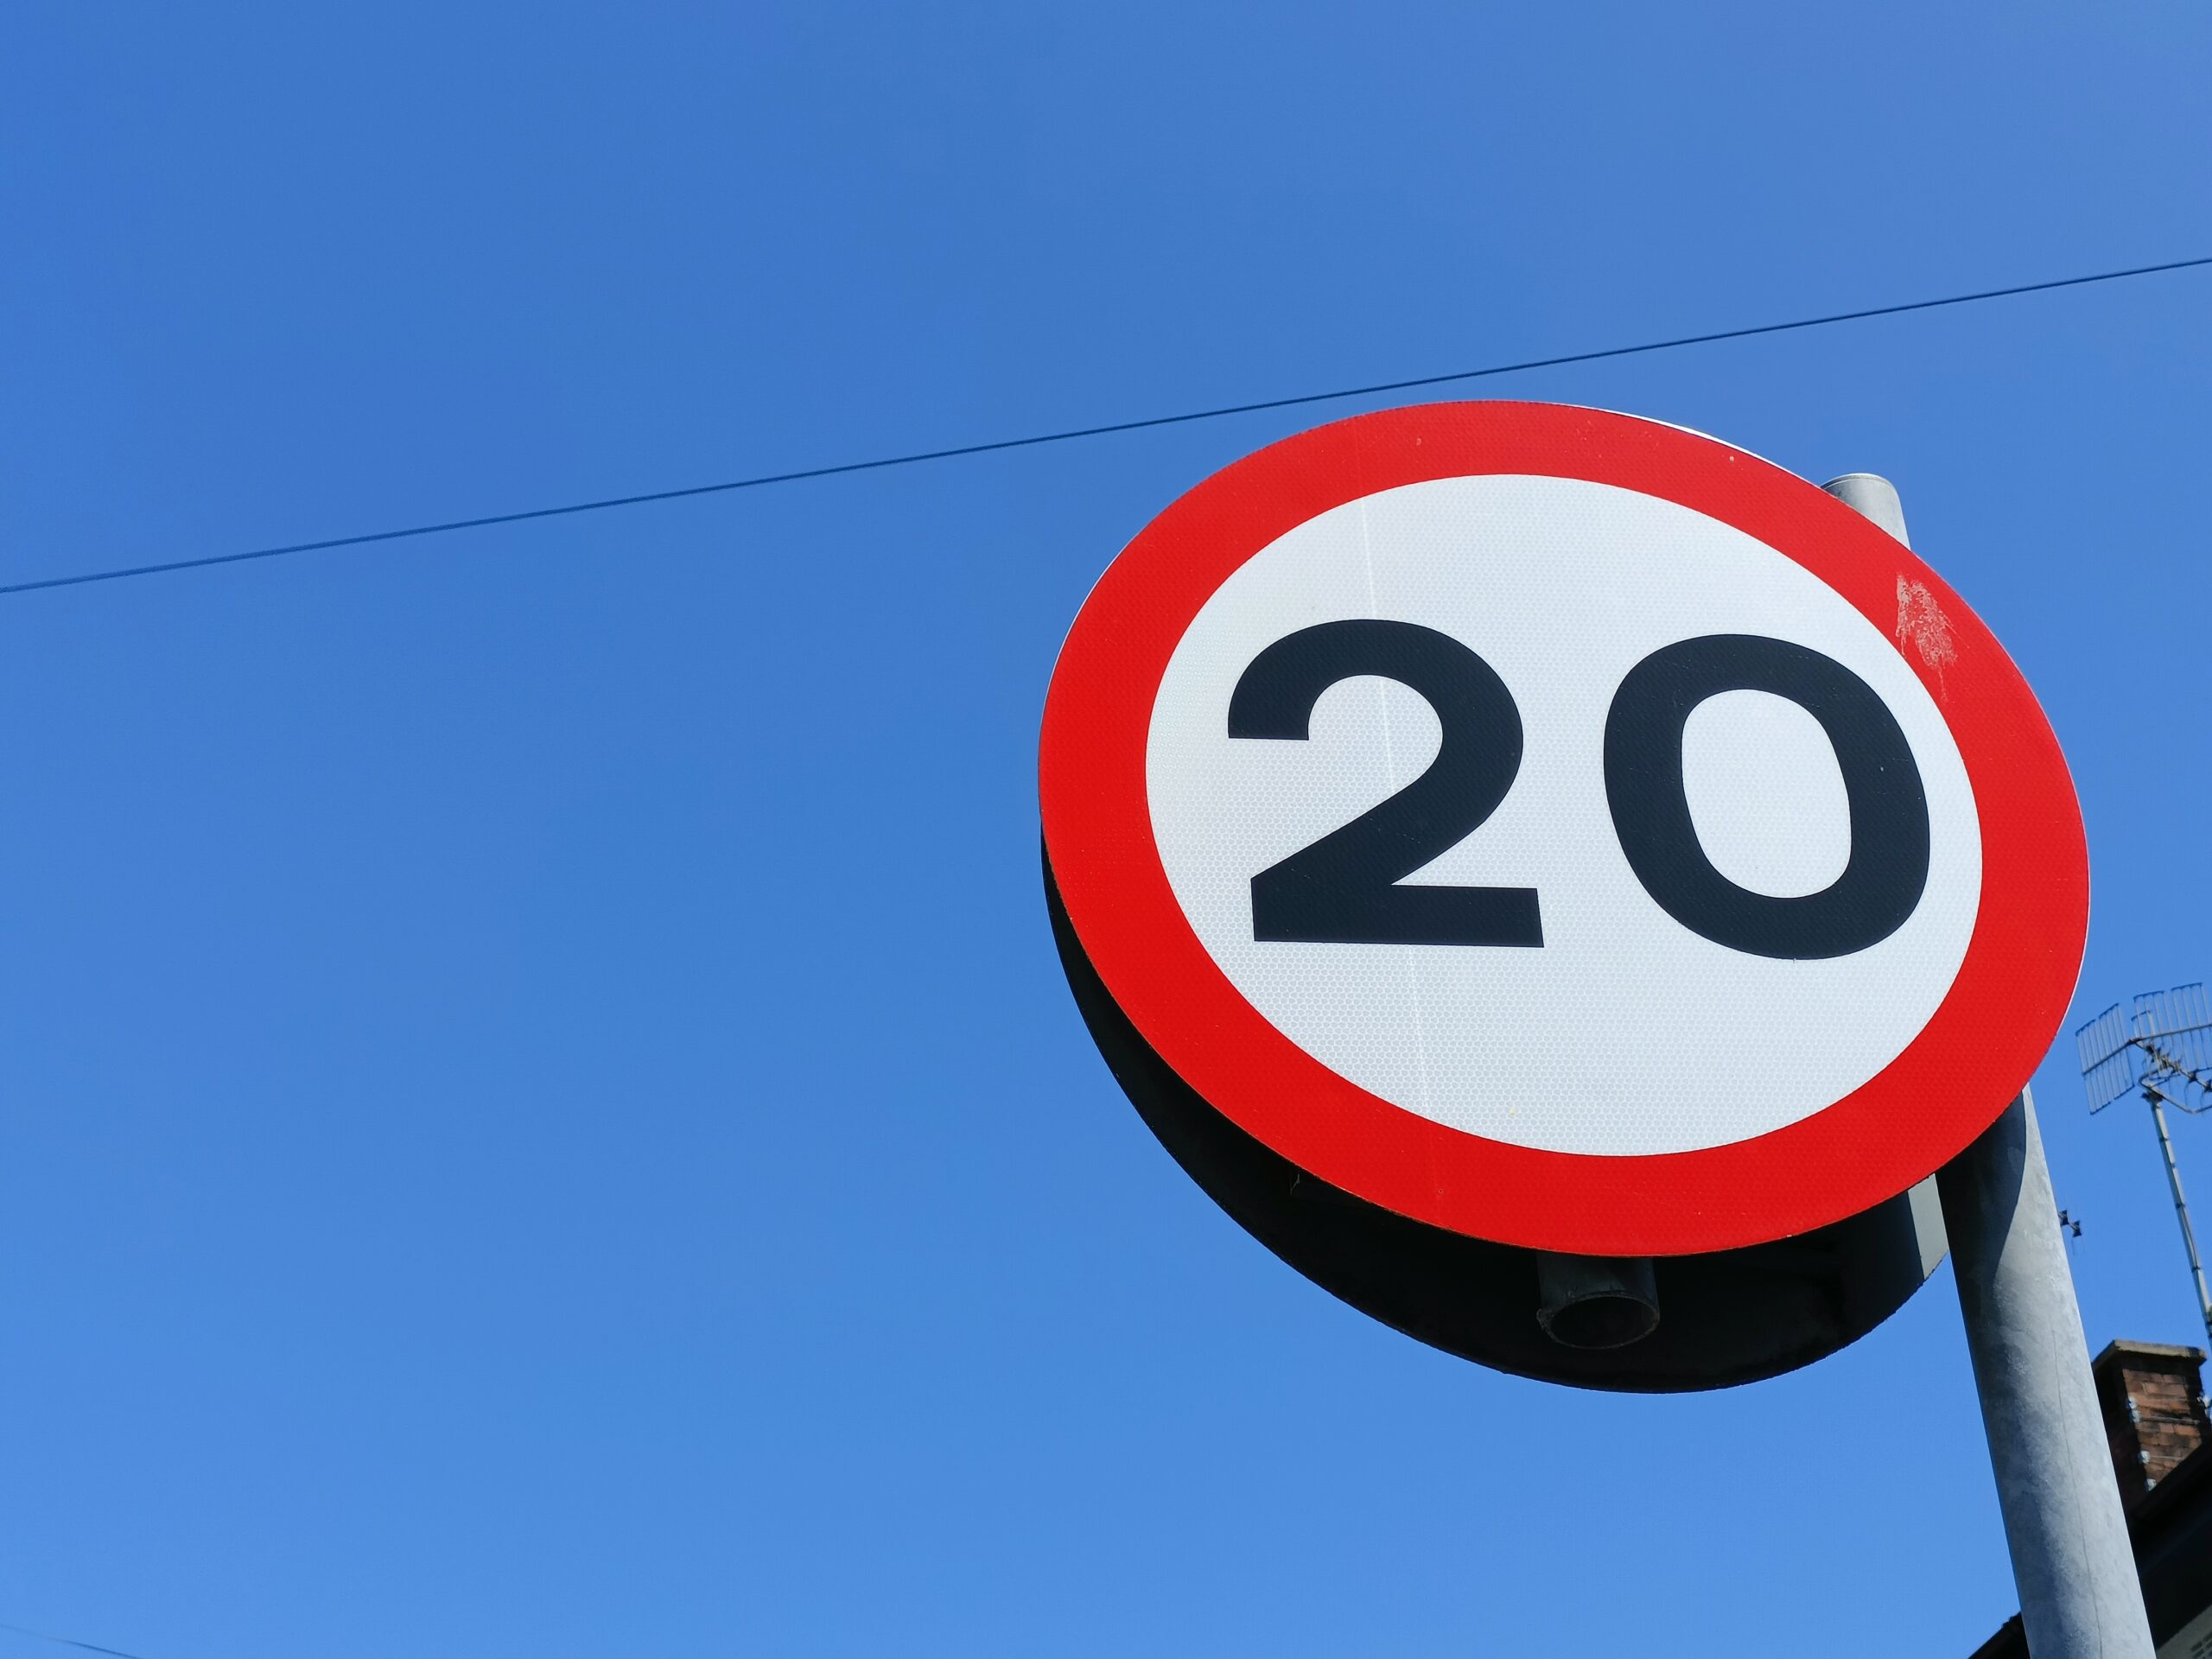 Look out for new 20mph speed limit signs in Ceredigion this weekend